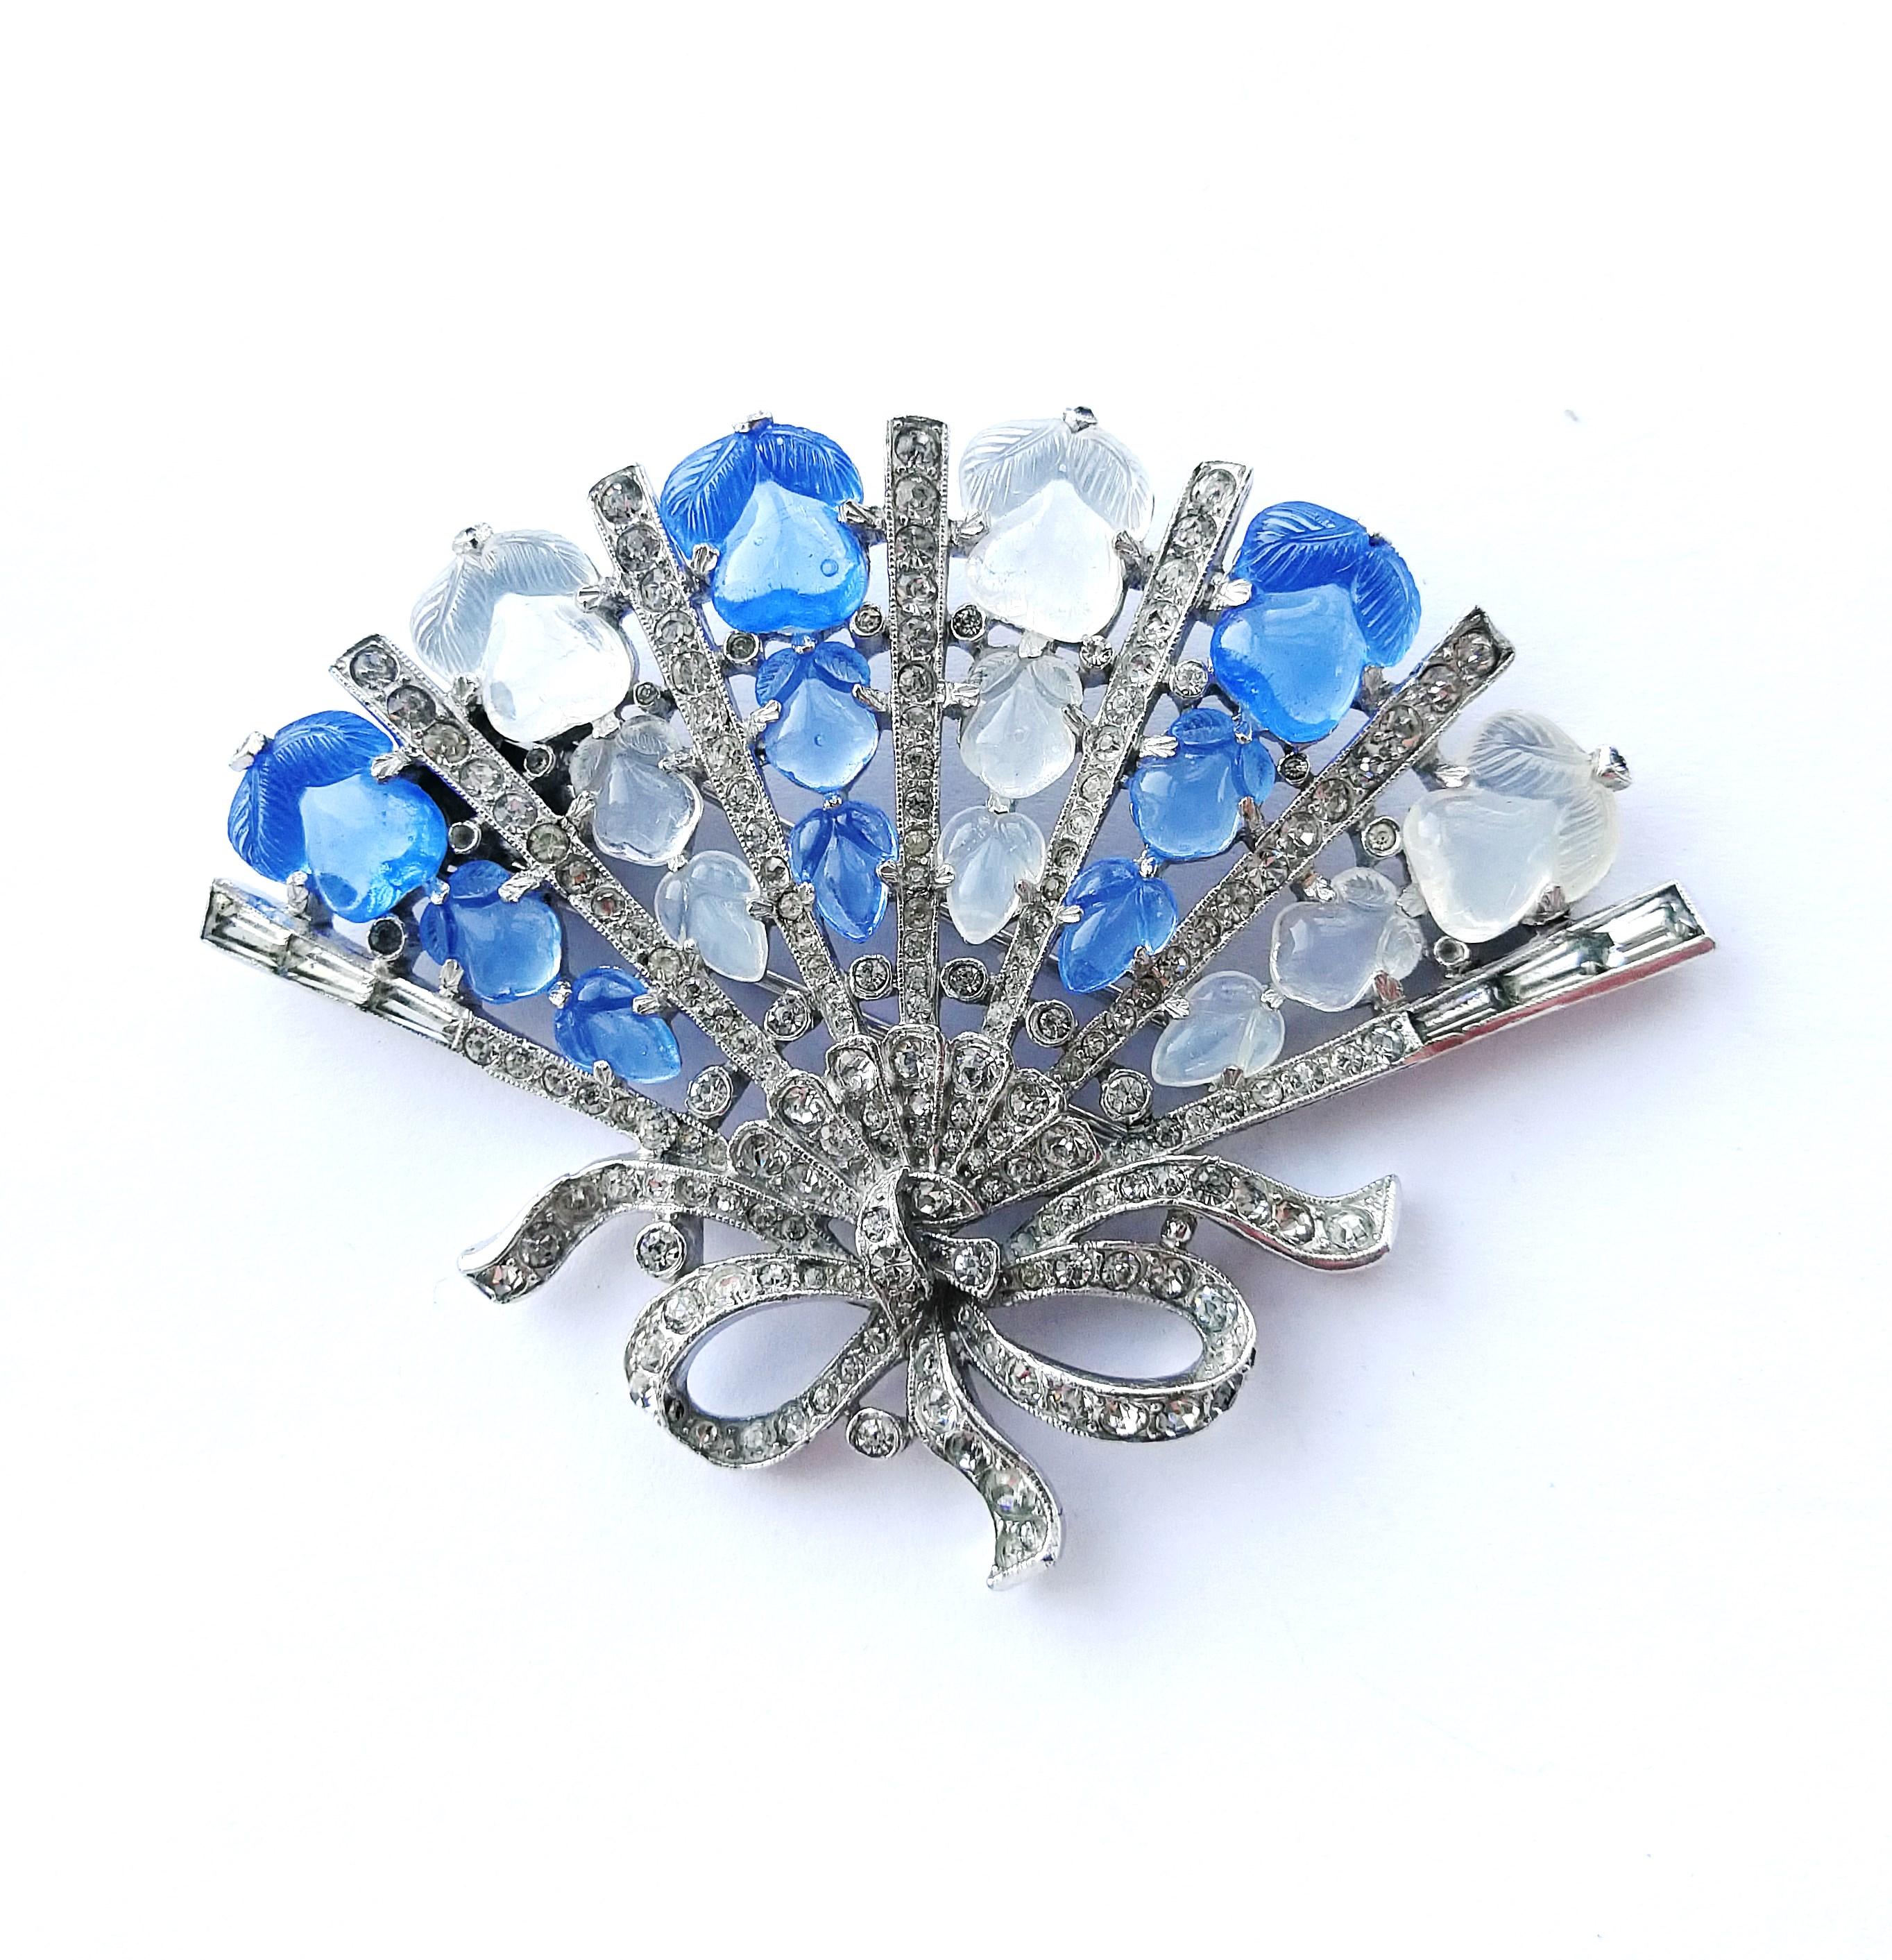 Women's Iconic and important Cartier style 'fan' brooch, Trifari, USA, 1950s